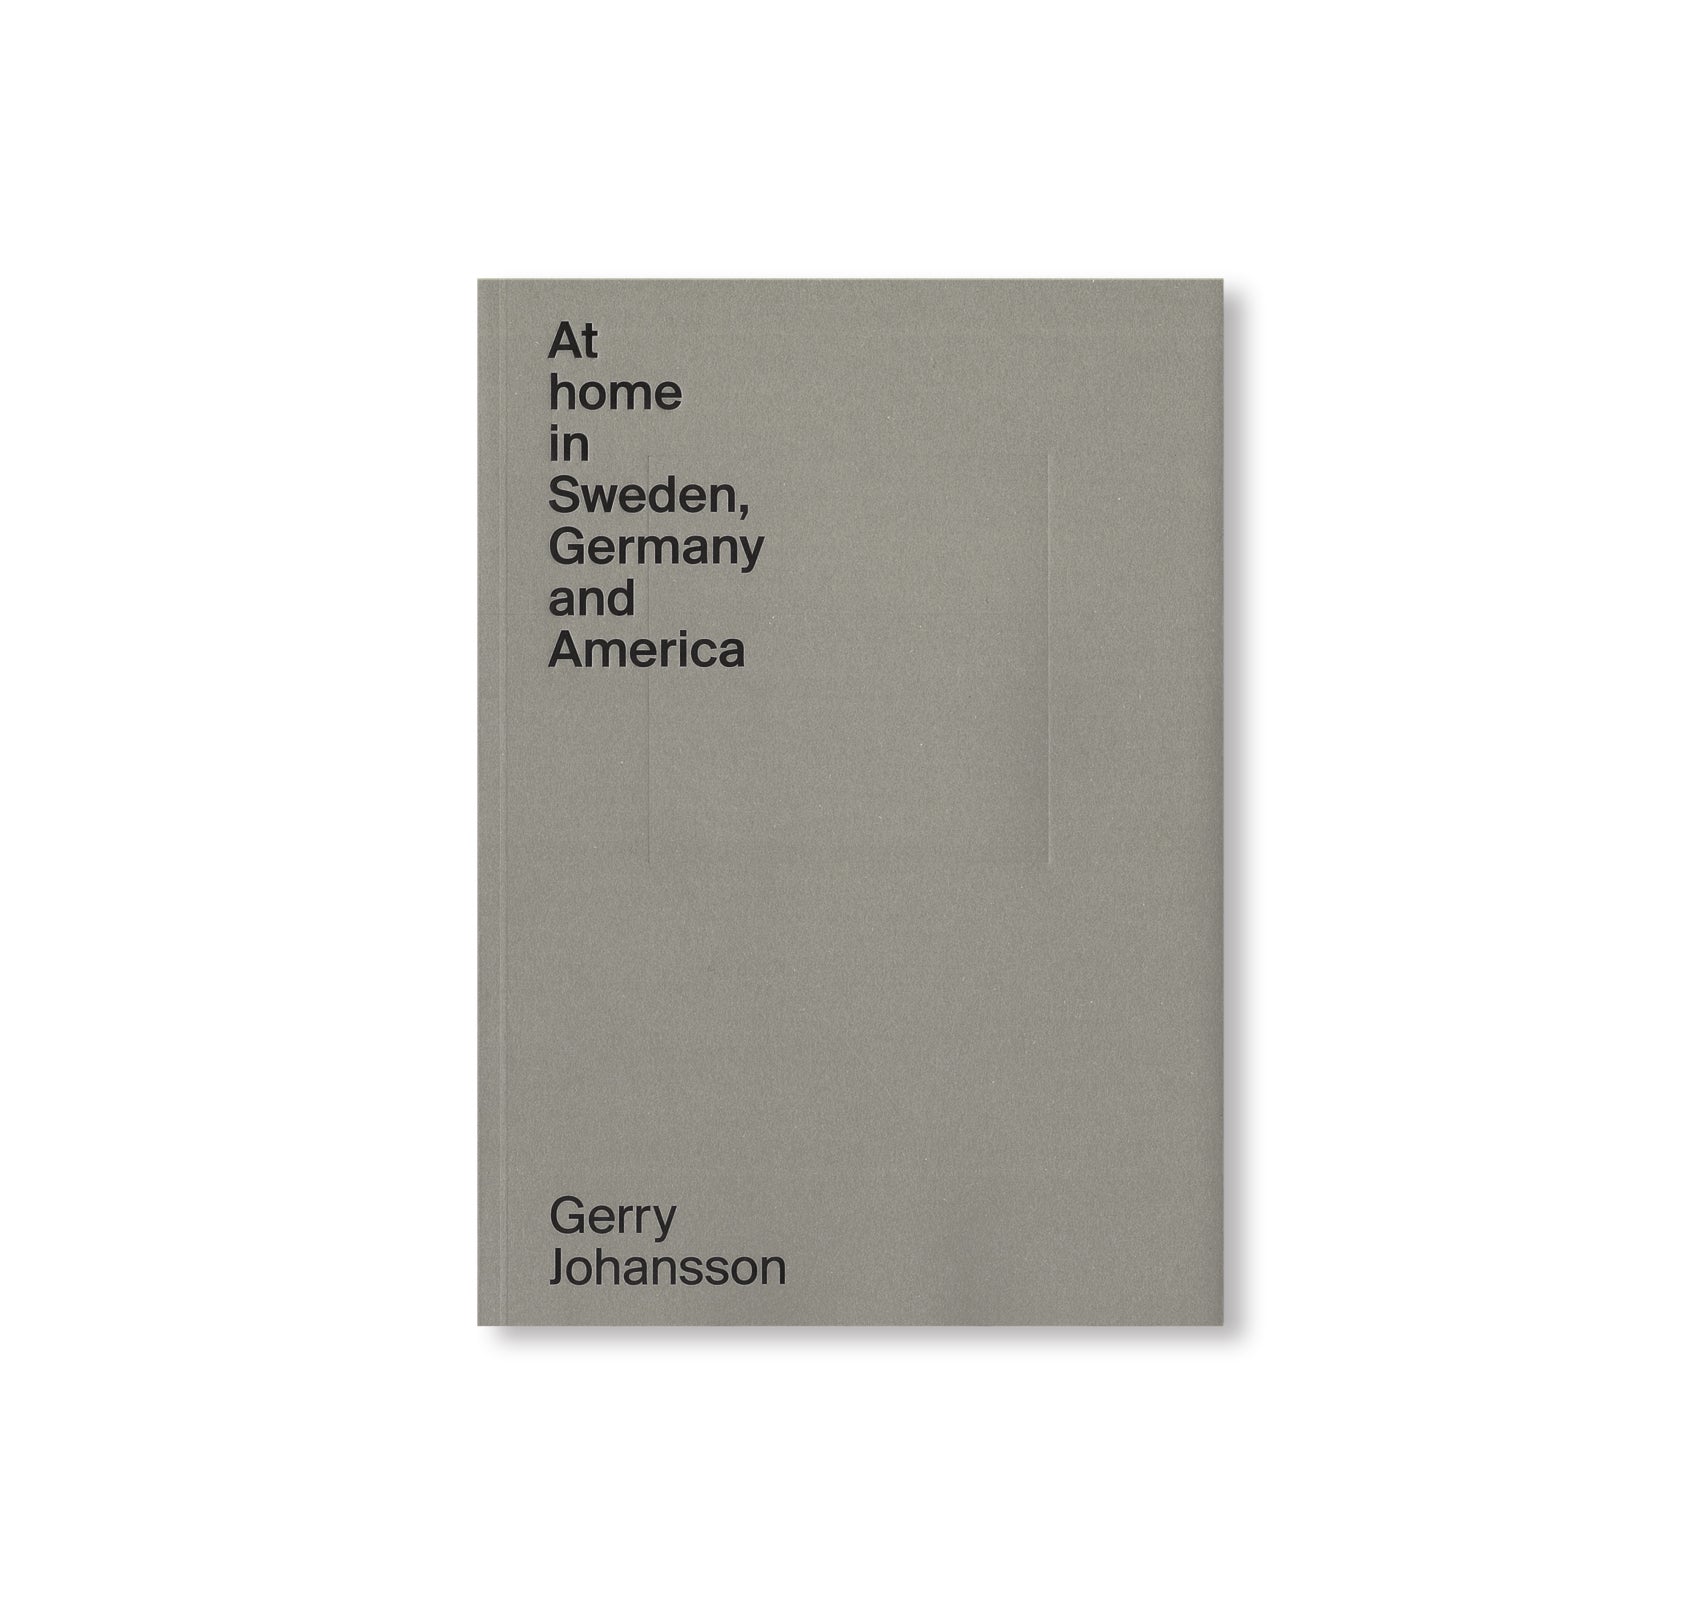 AT HOME IN SWEDEN, GERMANY AND AMERICA by Gerry Johansson [SIGNED]